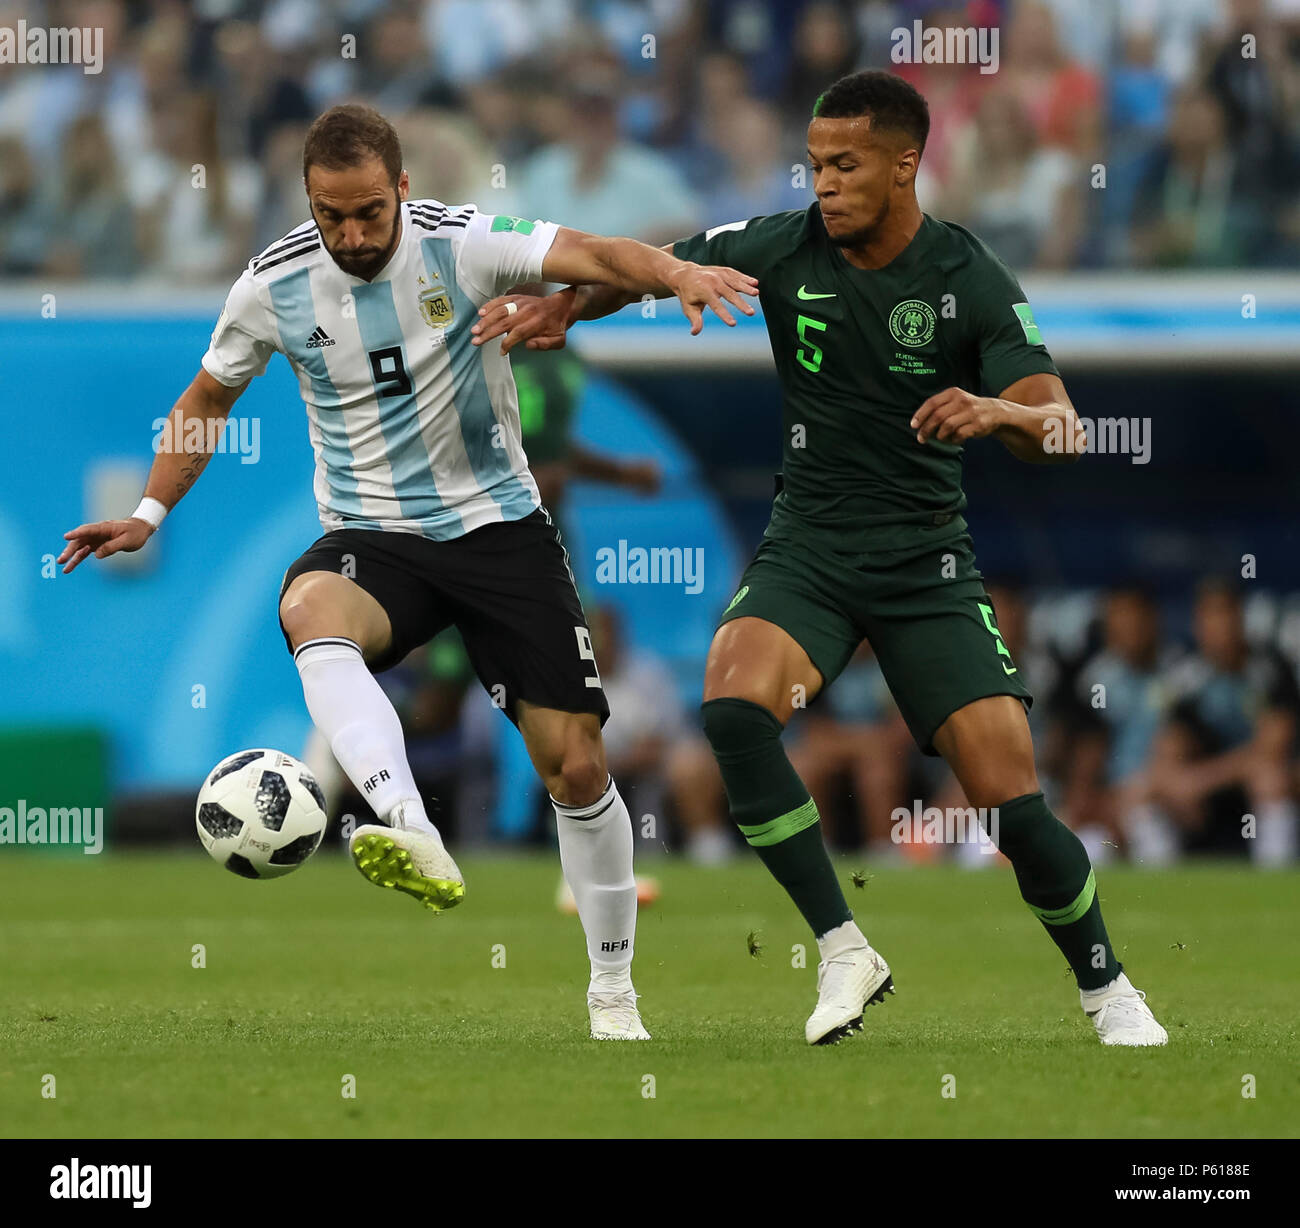 St Petersburg, Russia. 26th Jun, 2018. Gonzalo Higuain of Argentina and William Troost-Ekong of Nigeria during the 2018 FIFA World Cup Group D match between Nigeria and Argentina at Saint Petersburg Stadium on June 26th 2018 in Saint Petersburg, Russia. (Photo by Daniel Chesterton/phcimages.com) Credit: PHC Images/Alamy Live News Stock Photo